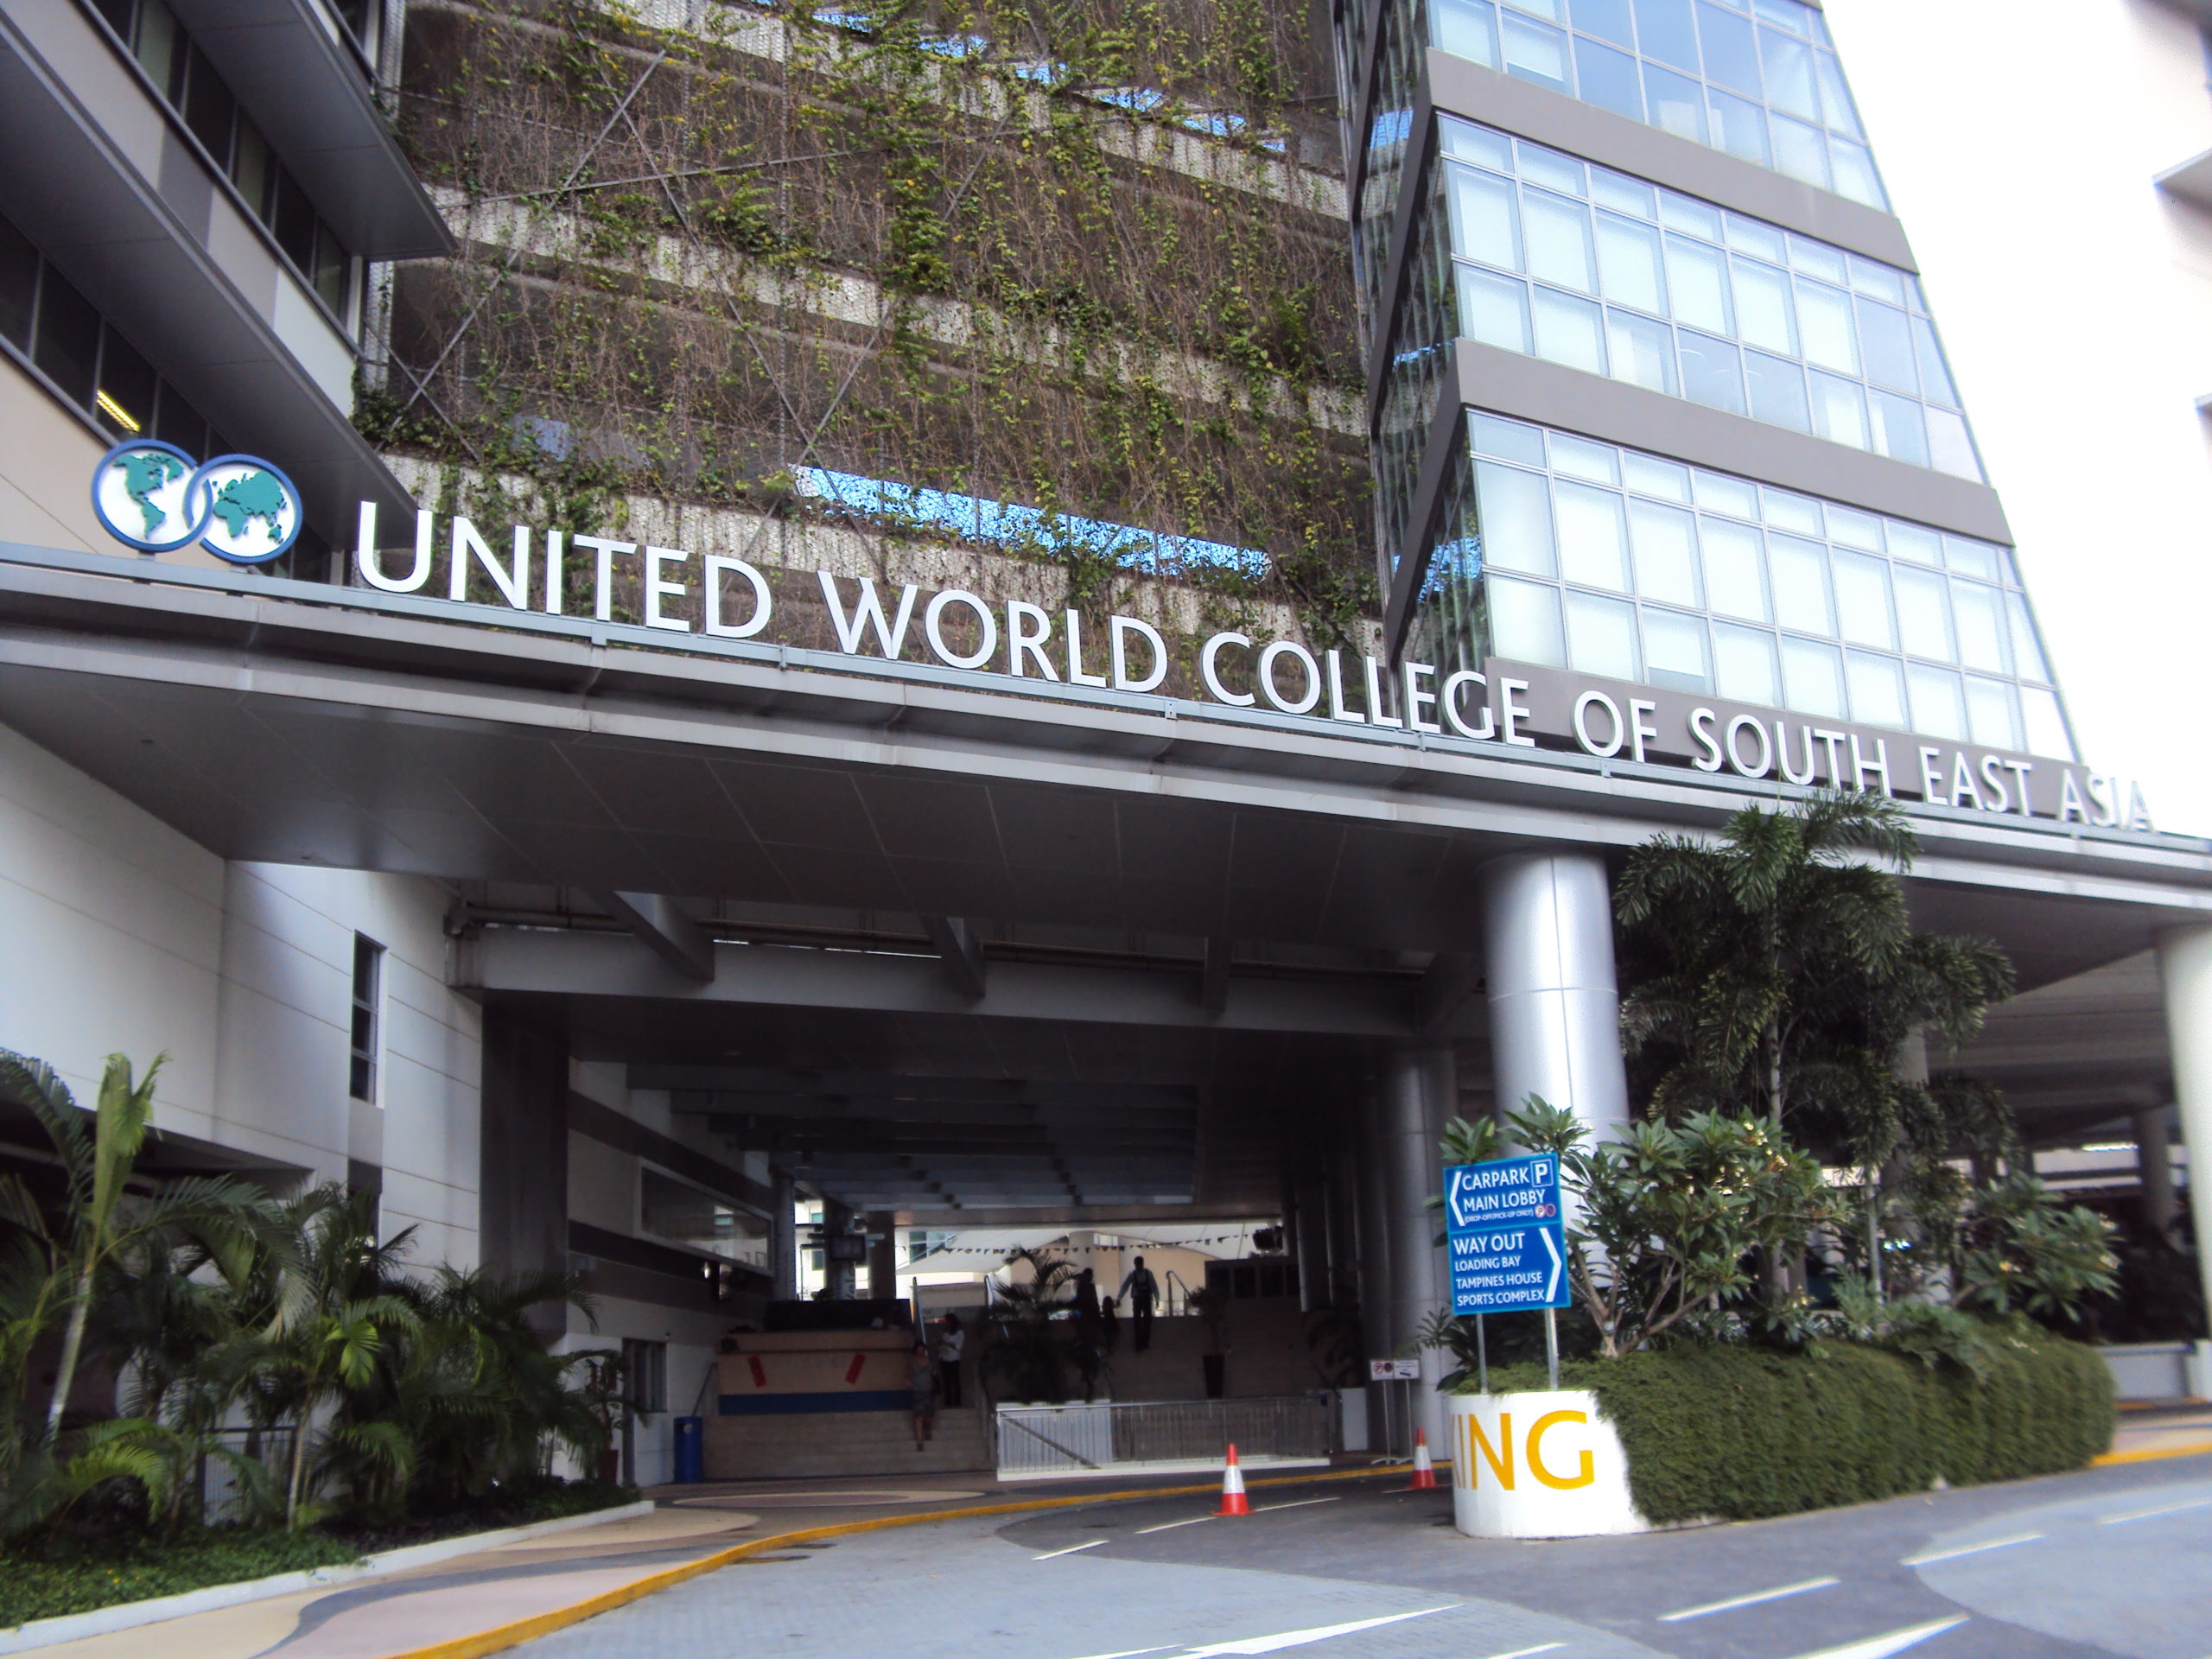 Singapore: United World College of South East Asia (UWCSEA)